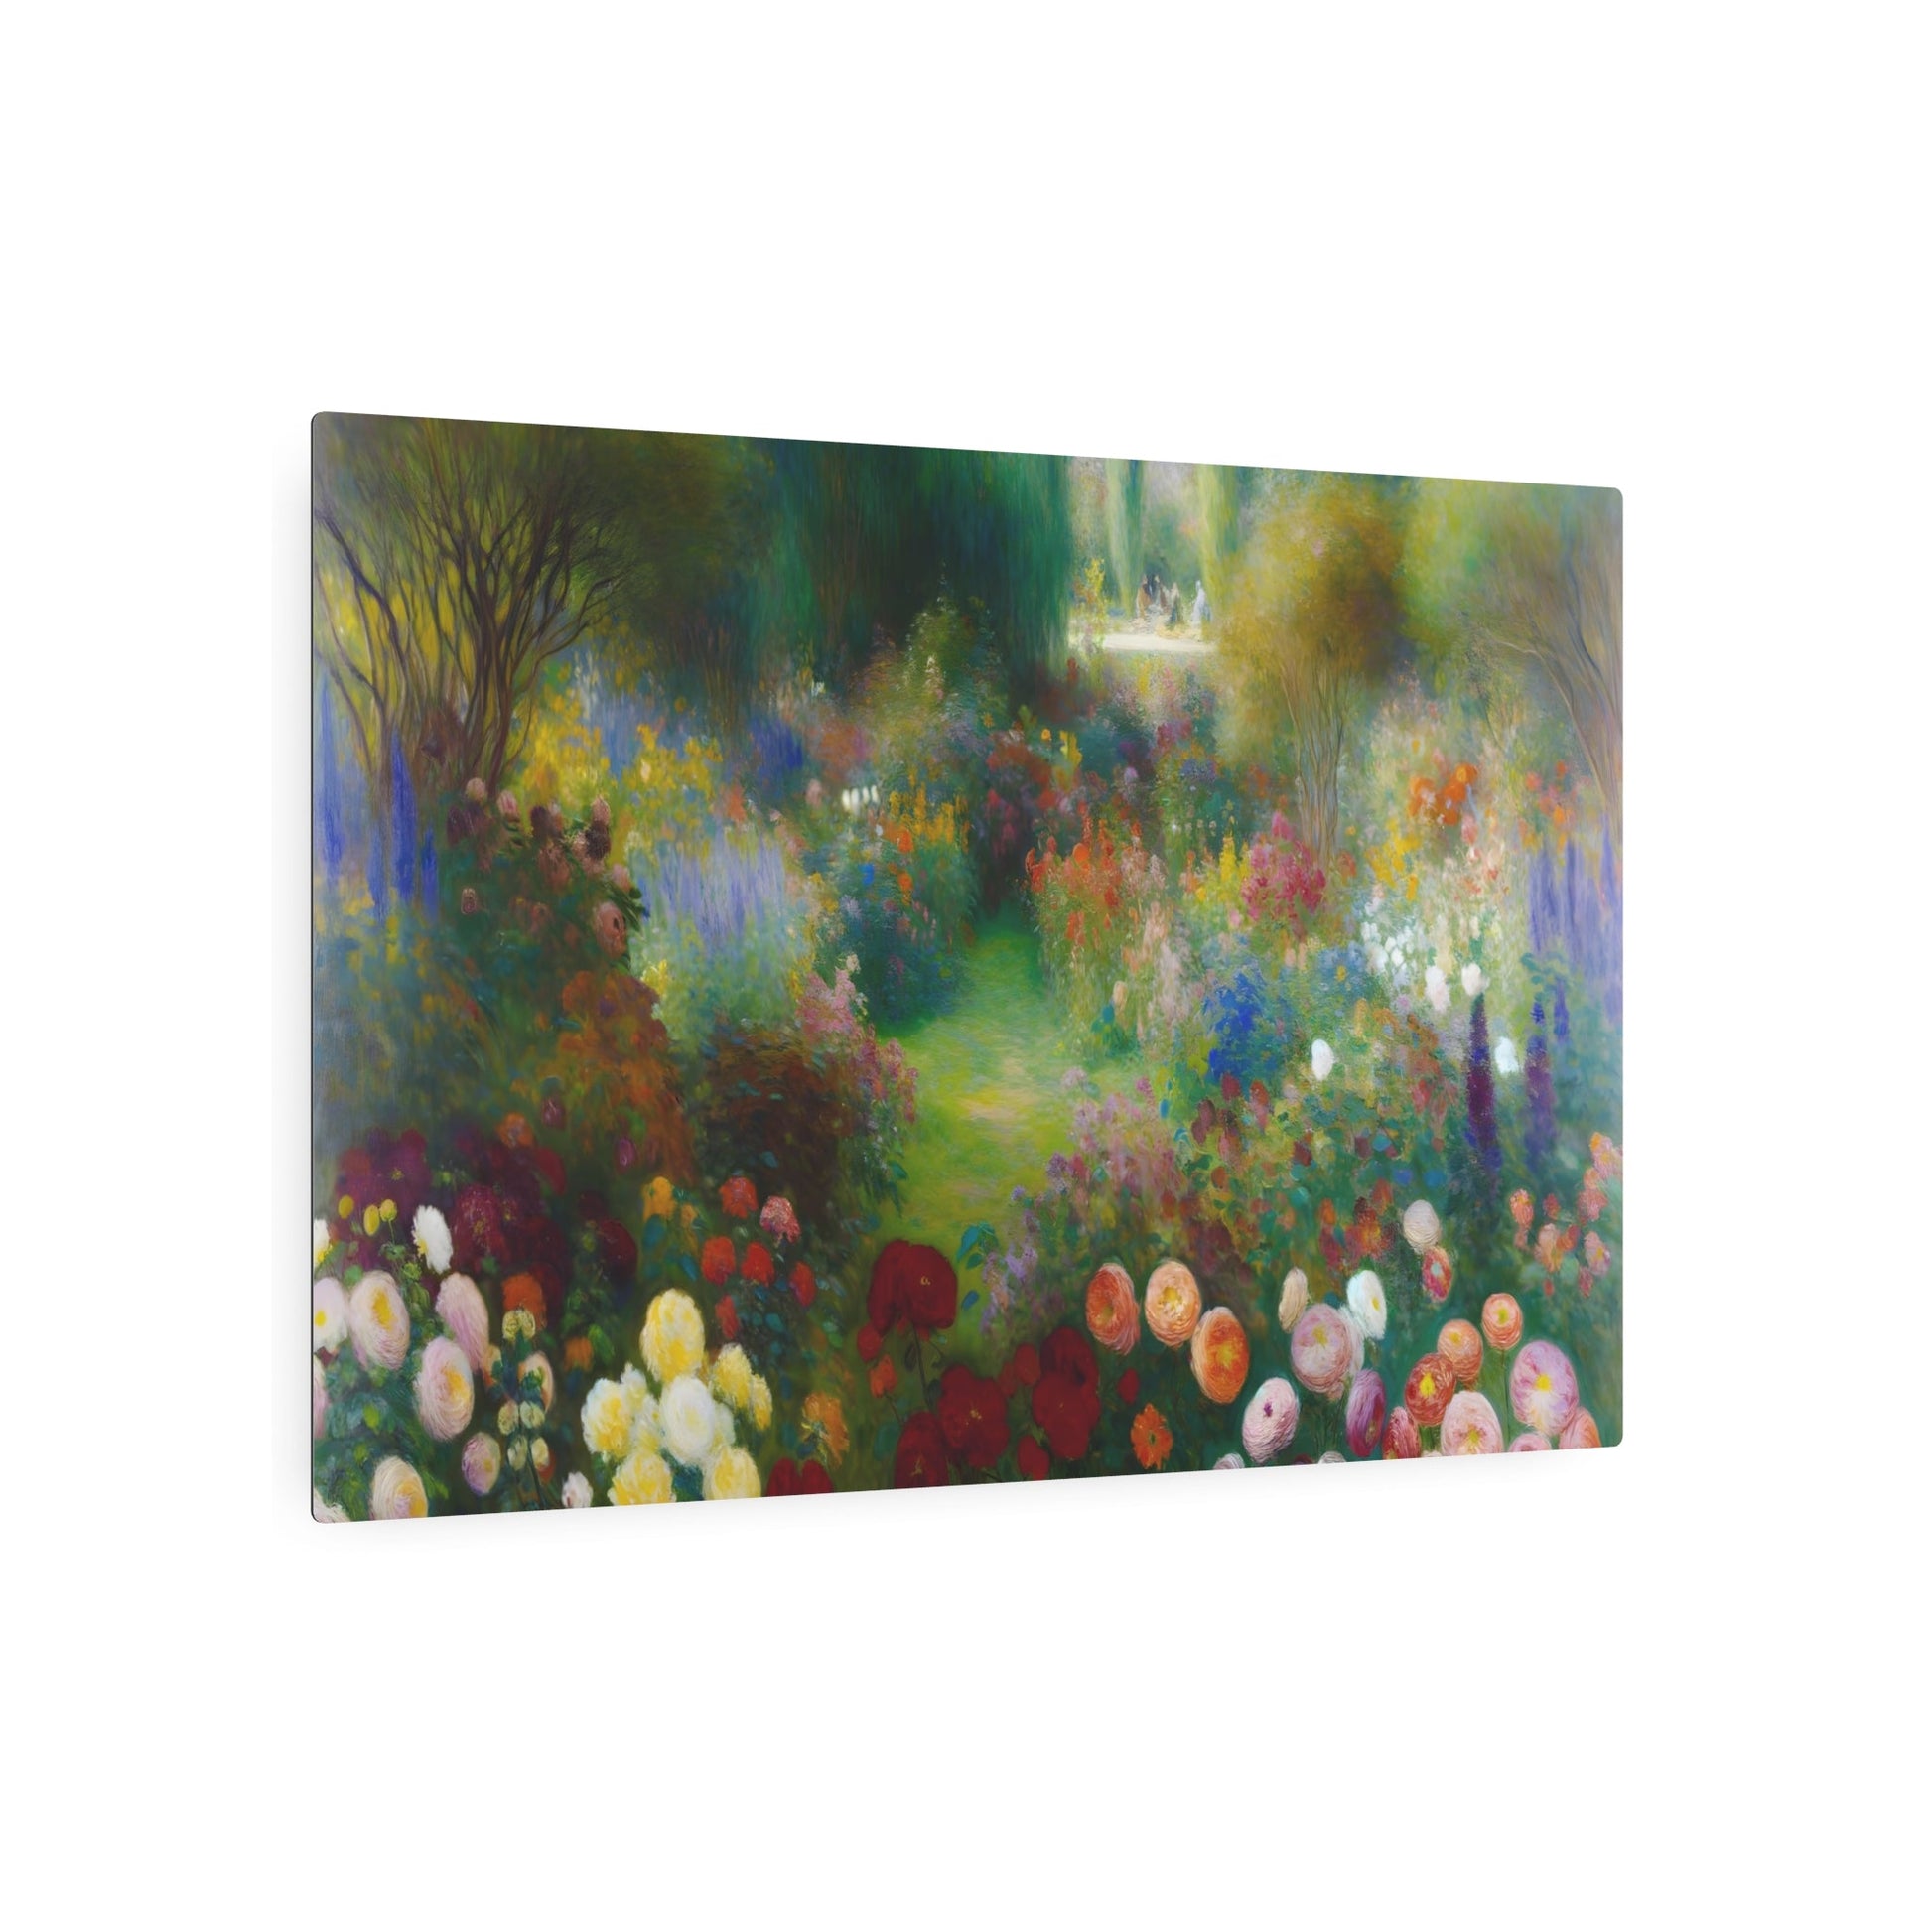 Metal Poster Art | "Romanticism Era Inspired Vibrant Garden Painting - Western Art Styles, Lush Floral Scenery in Tranquil Atmosphere, Romanticism Sub-category - Metal Poster Art 36″ x 24″ (Horizontal) 0.12''